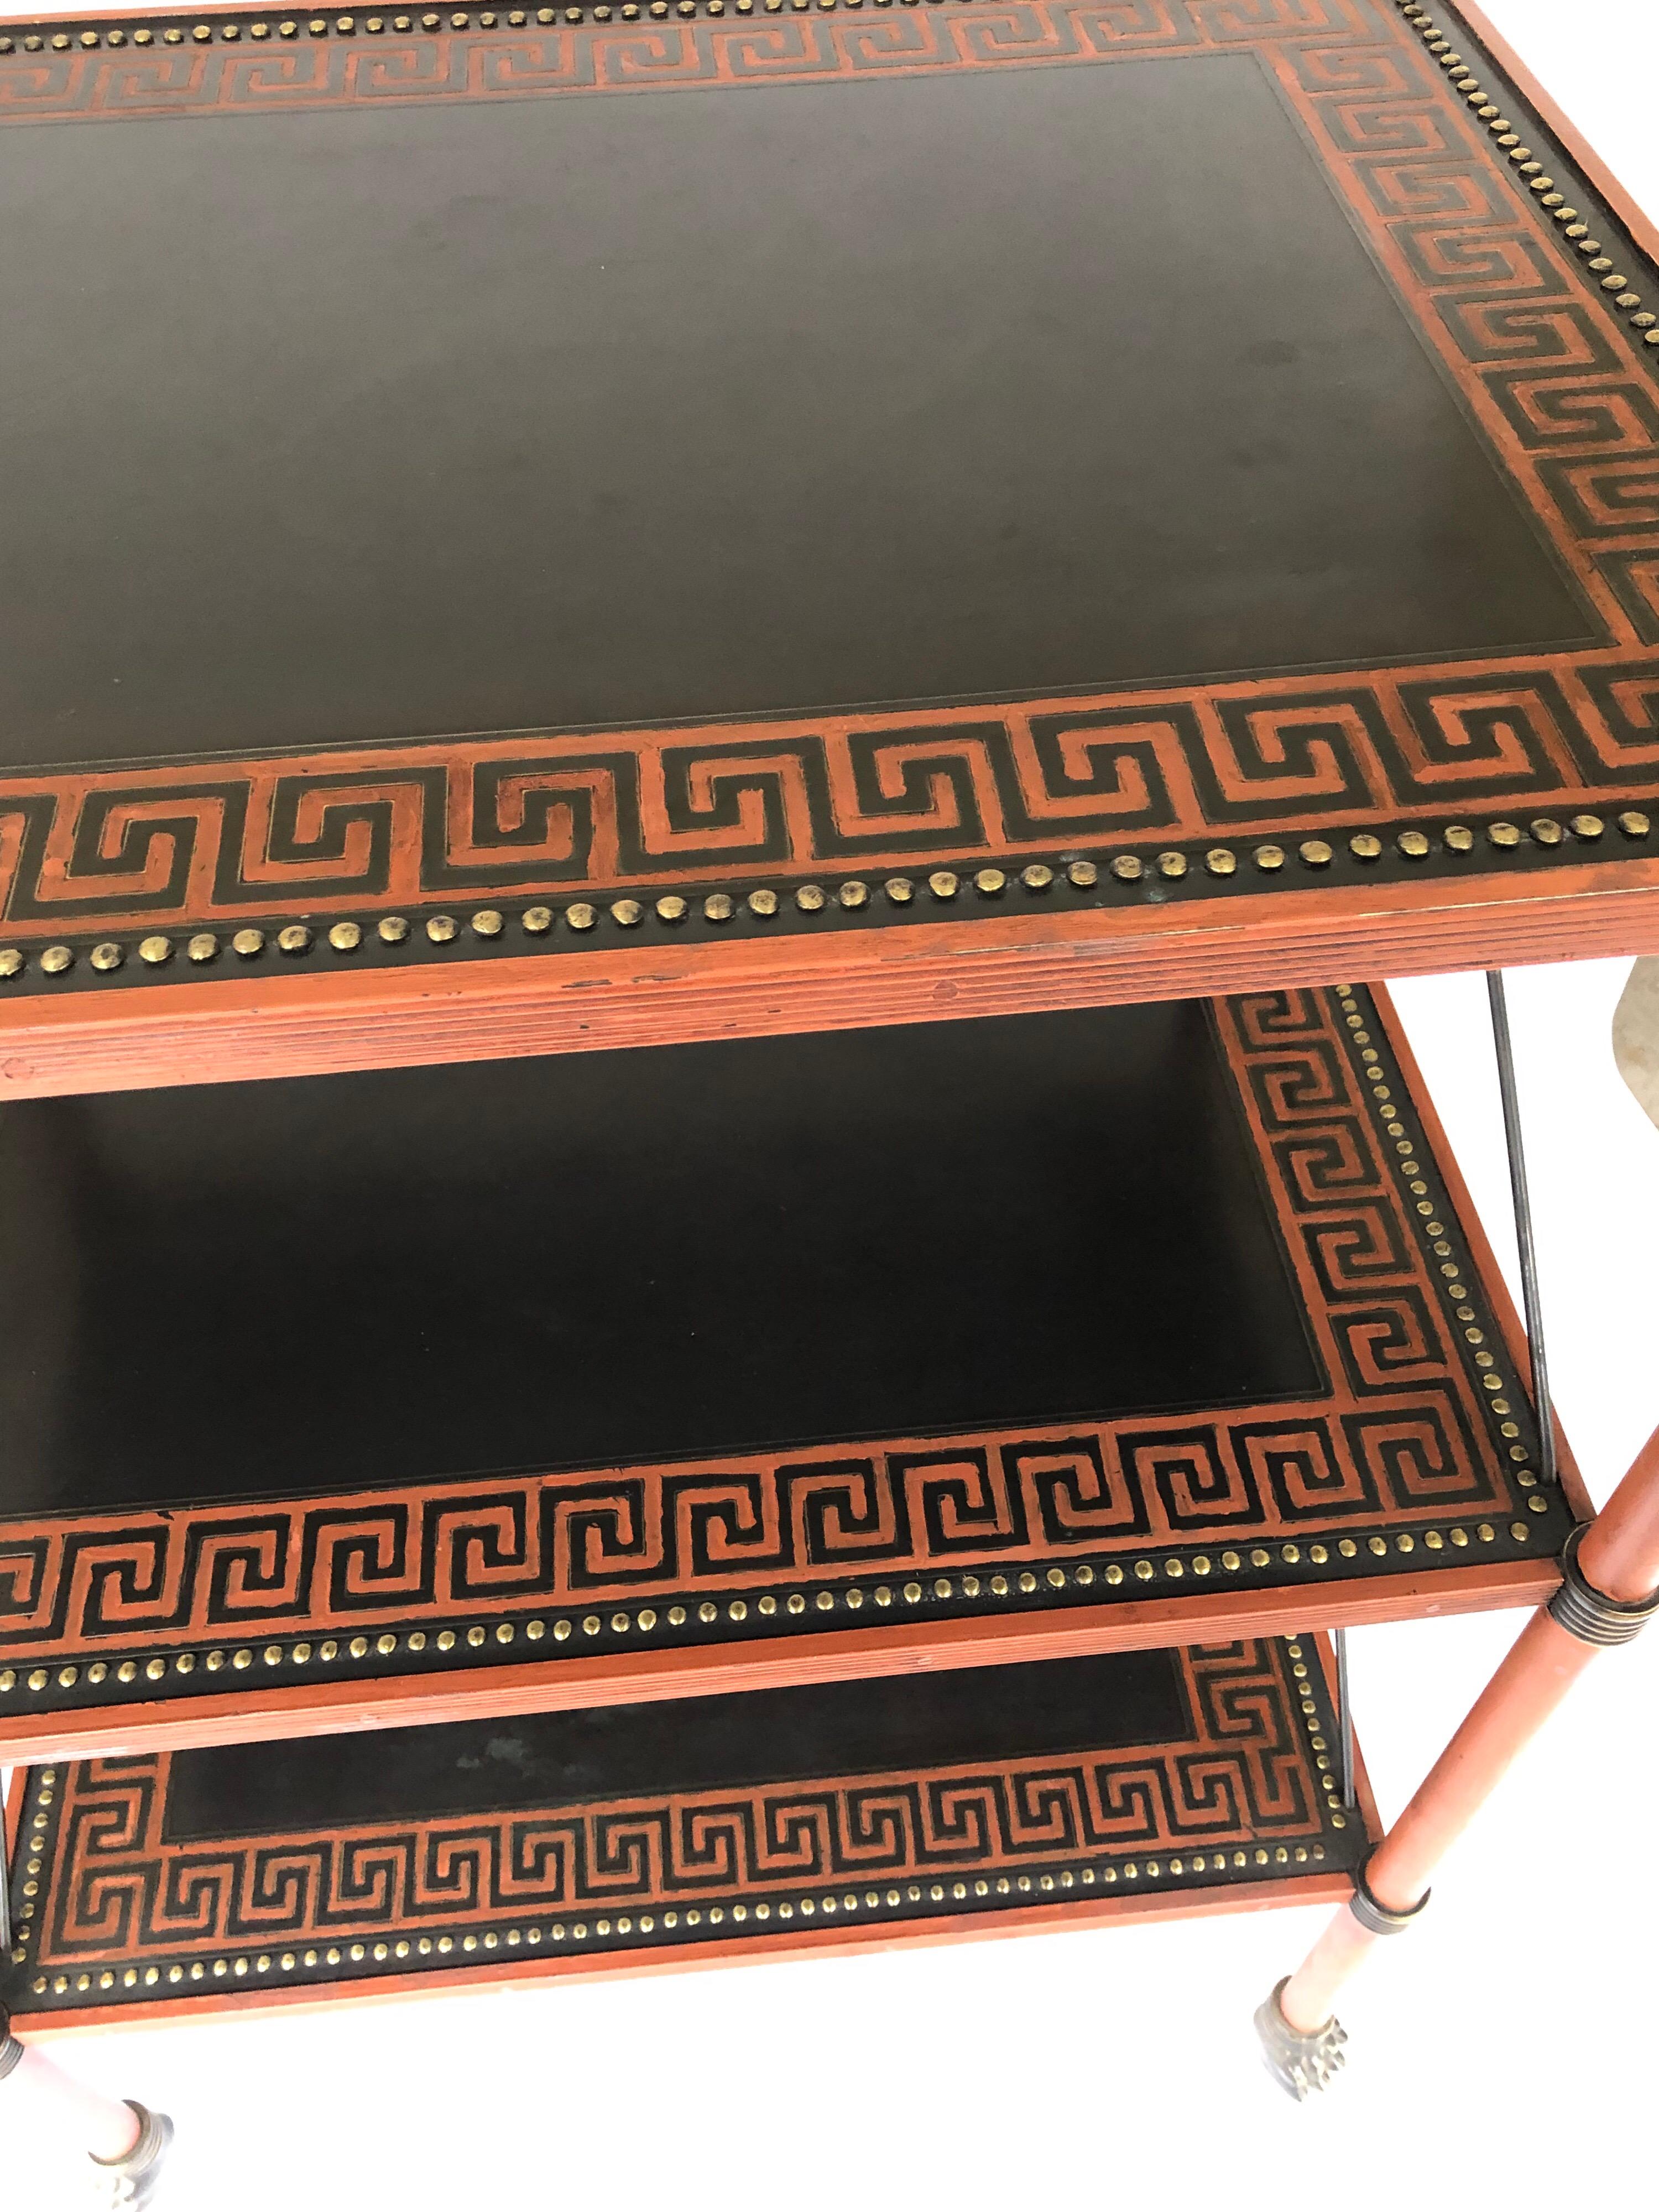 Theodore Alexander Regency style painted and lacquered 3-tier brass table. Black lacquer and decorated with siena red stringing and Greek key design, as well as nailhead decoration bordering the frame. Lion claw feet. Theodore Alexander brass label